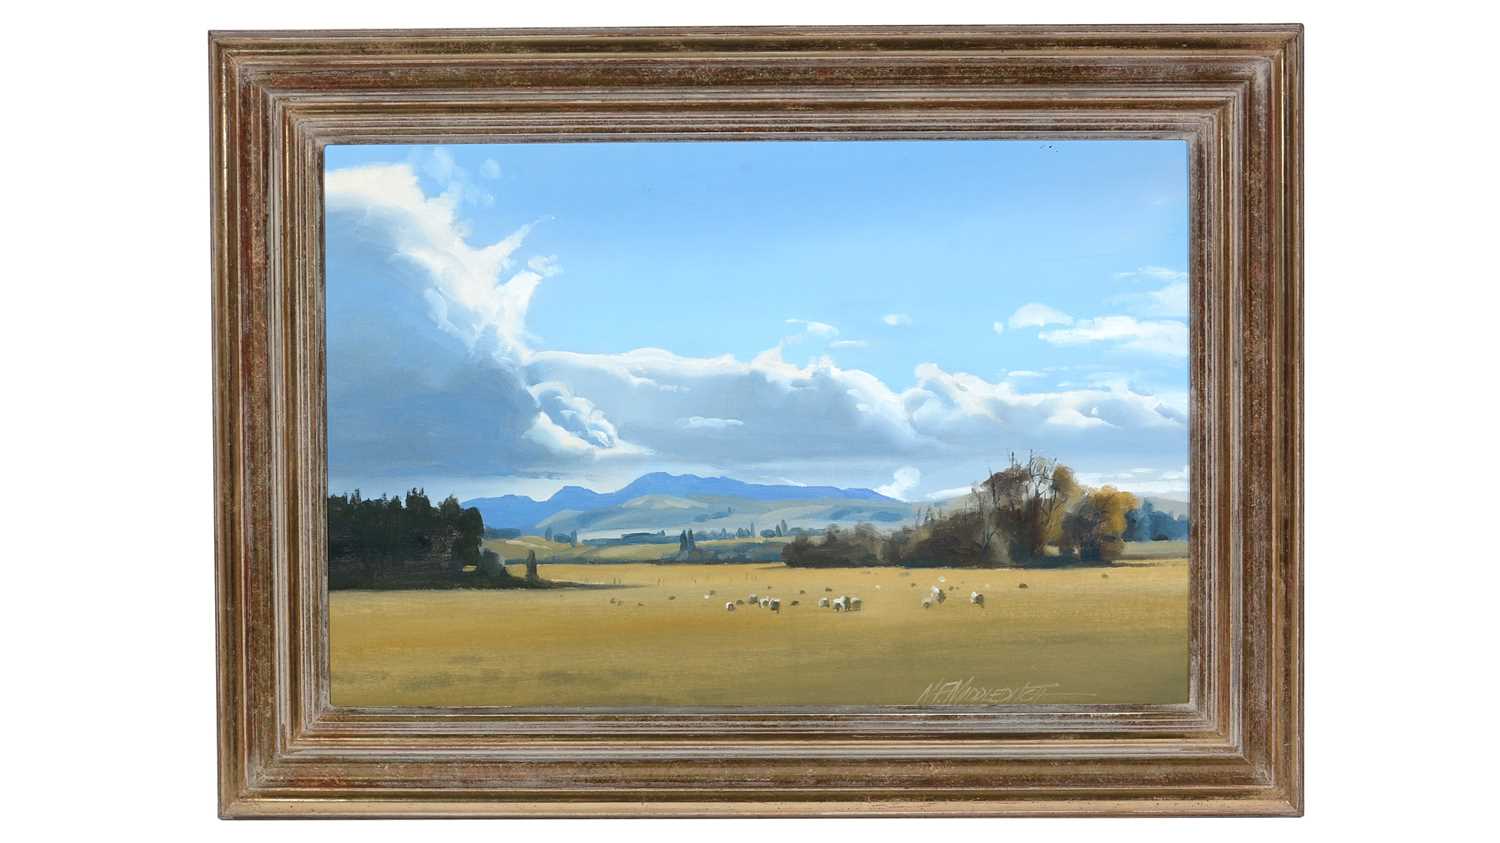 Lot 93 - Maurice Middleditch - Nor'wester, Near Hororata, New Zealand | oil